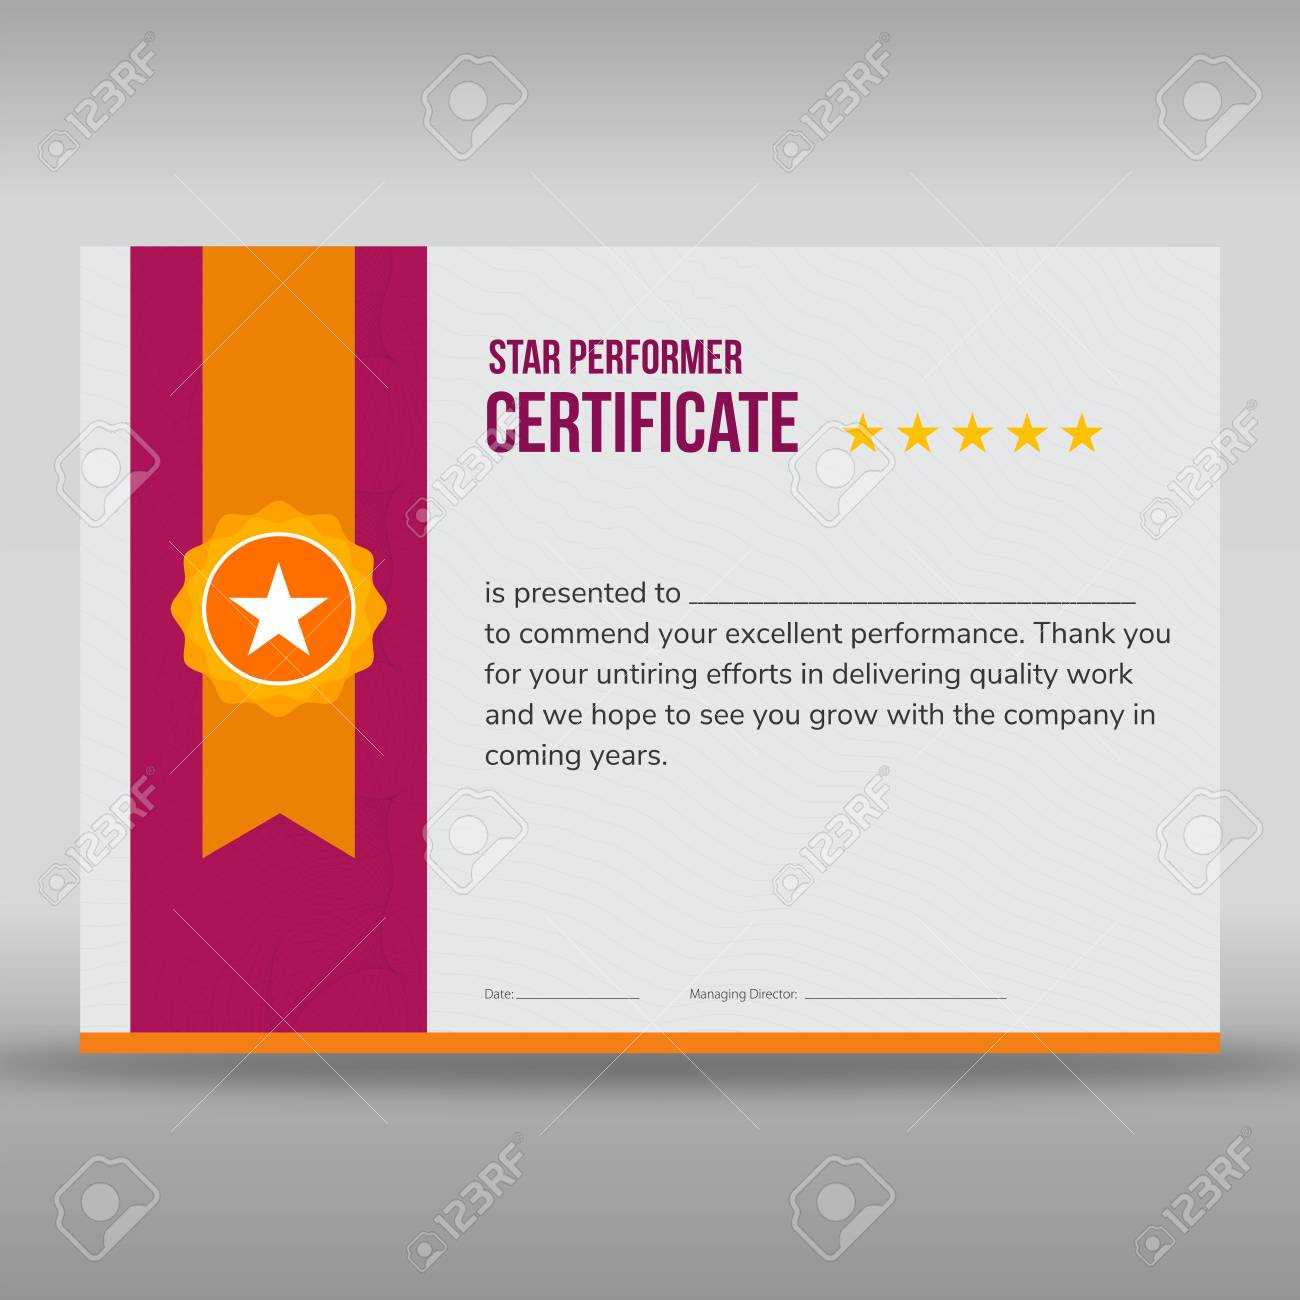 Star Performer Certificate Templates – Calep.midnightpig.co With Regard To Star Performer Certificate Templates